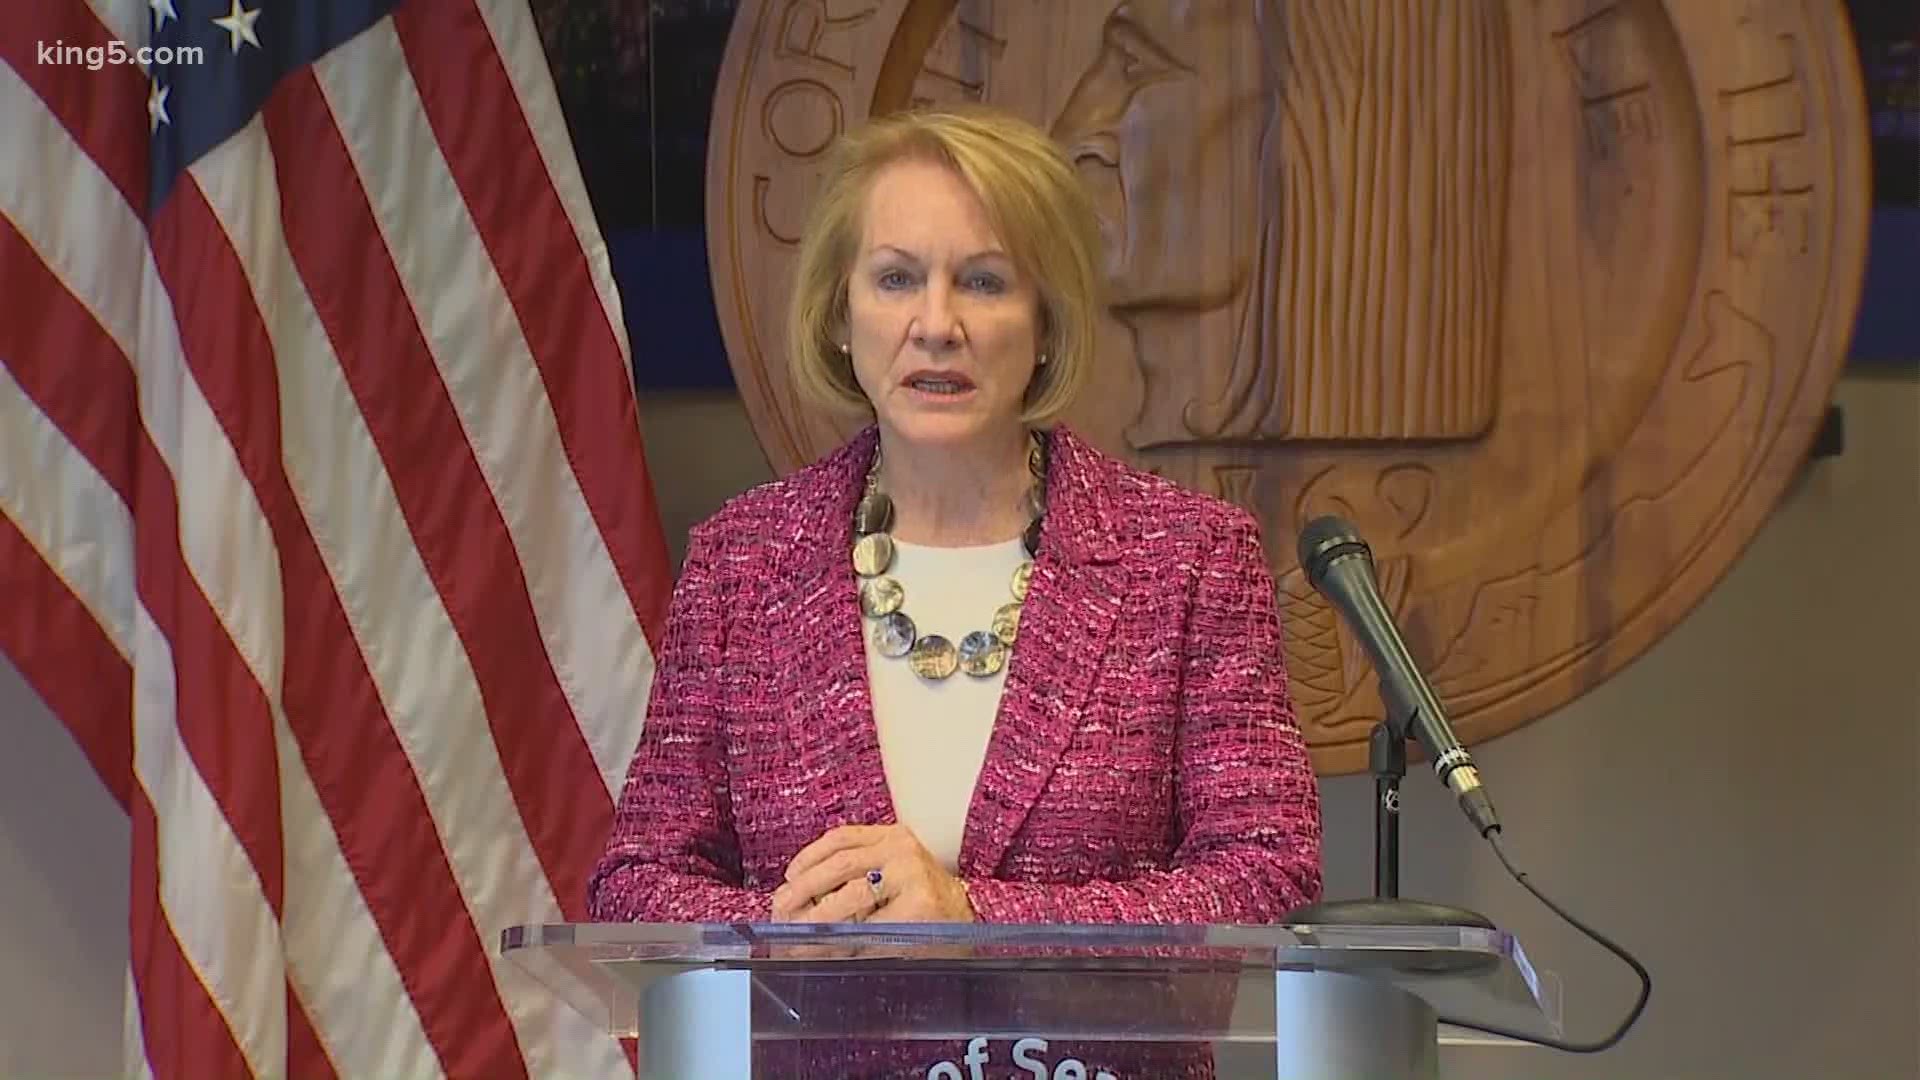 Mayor Durkan said the Department of Homeland Security forces, who are in Seattle ahead of planned protests, escalated the situation in Portland.